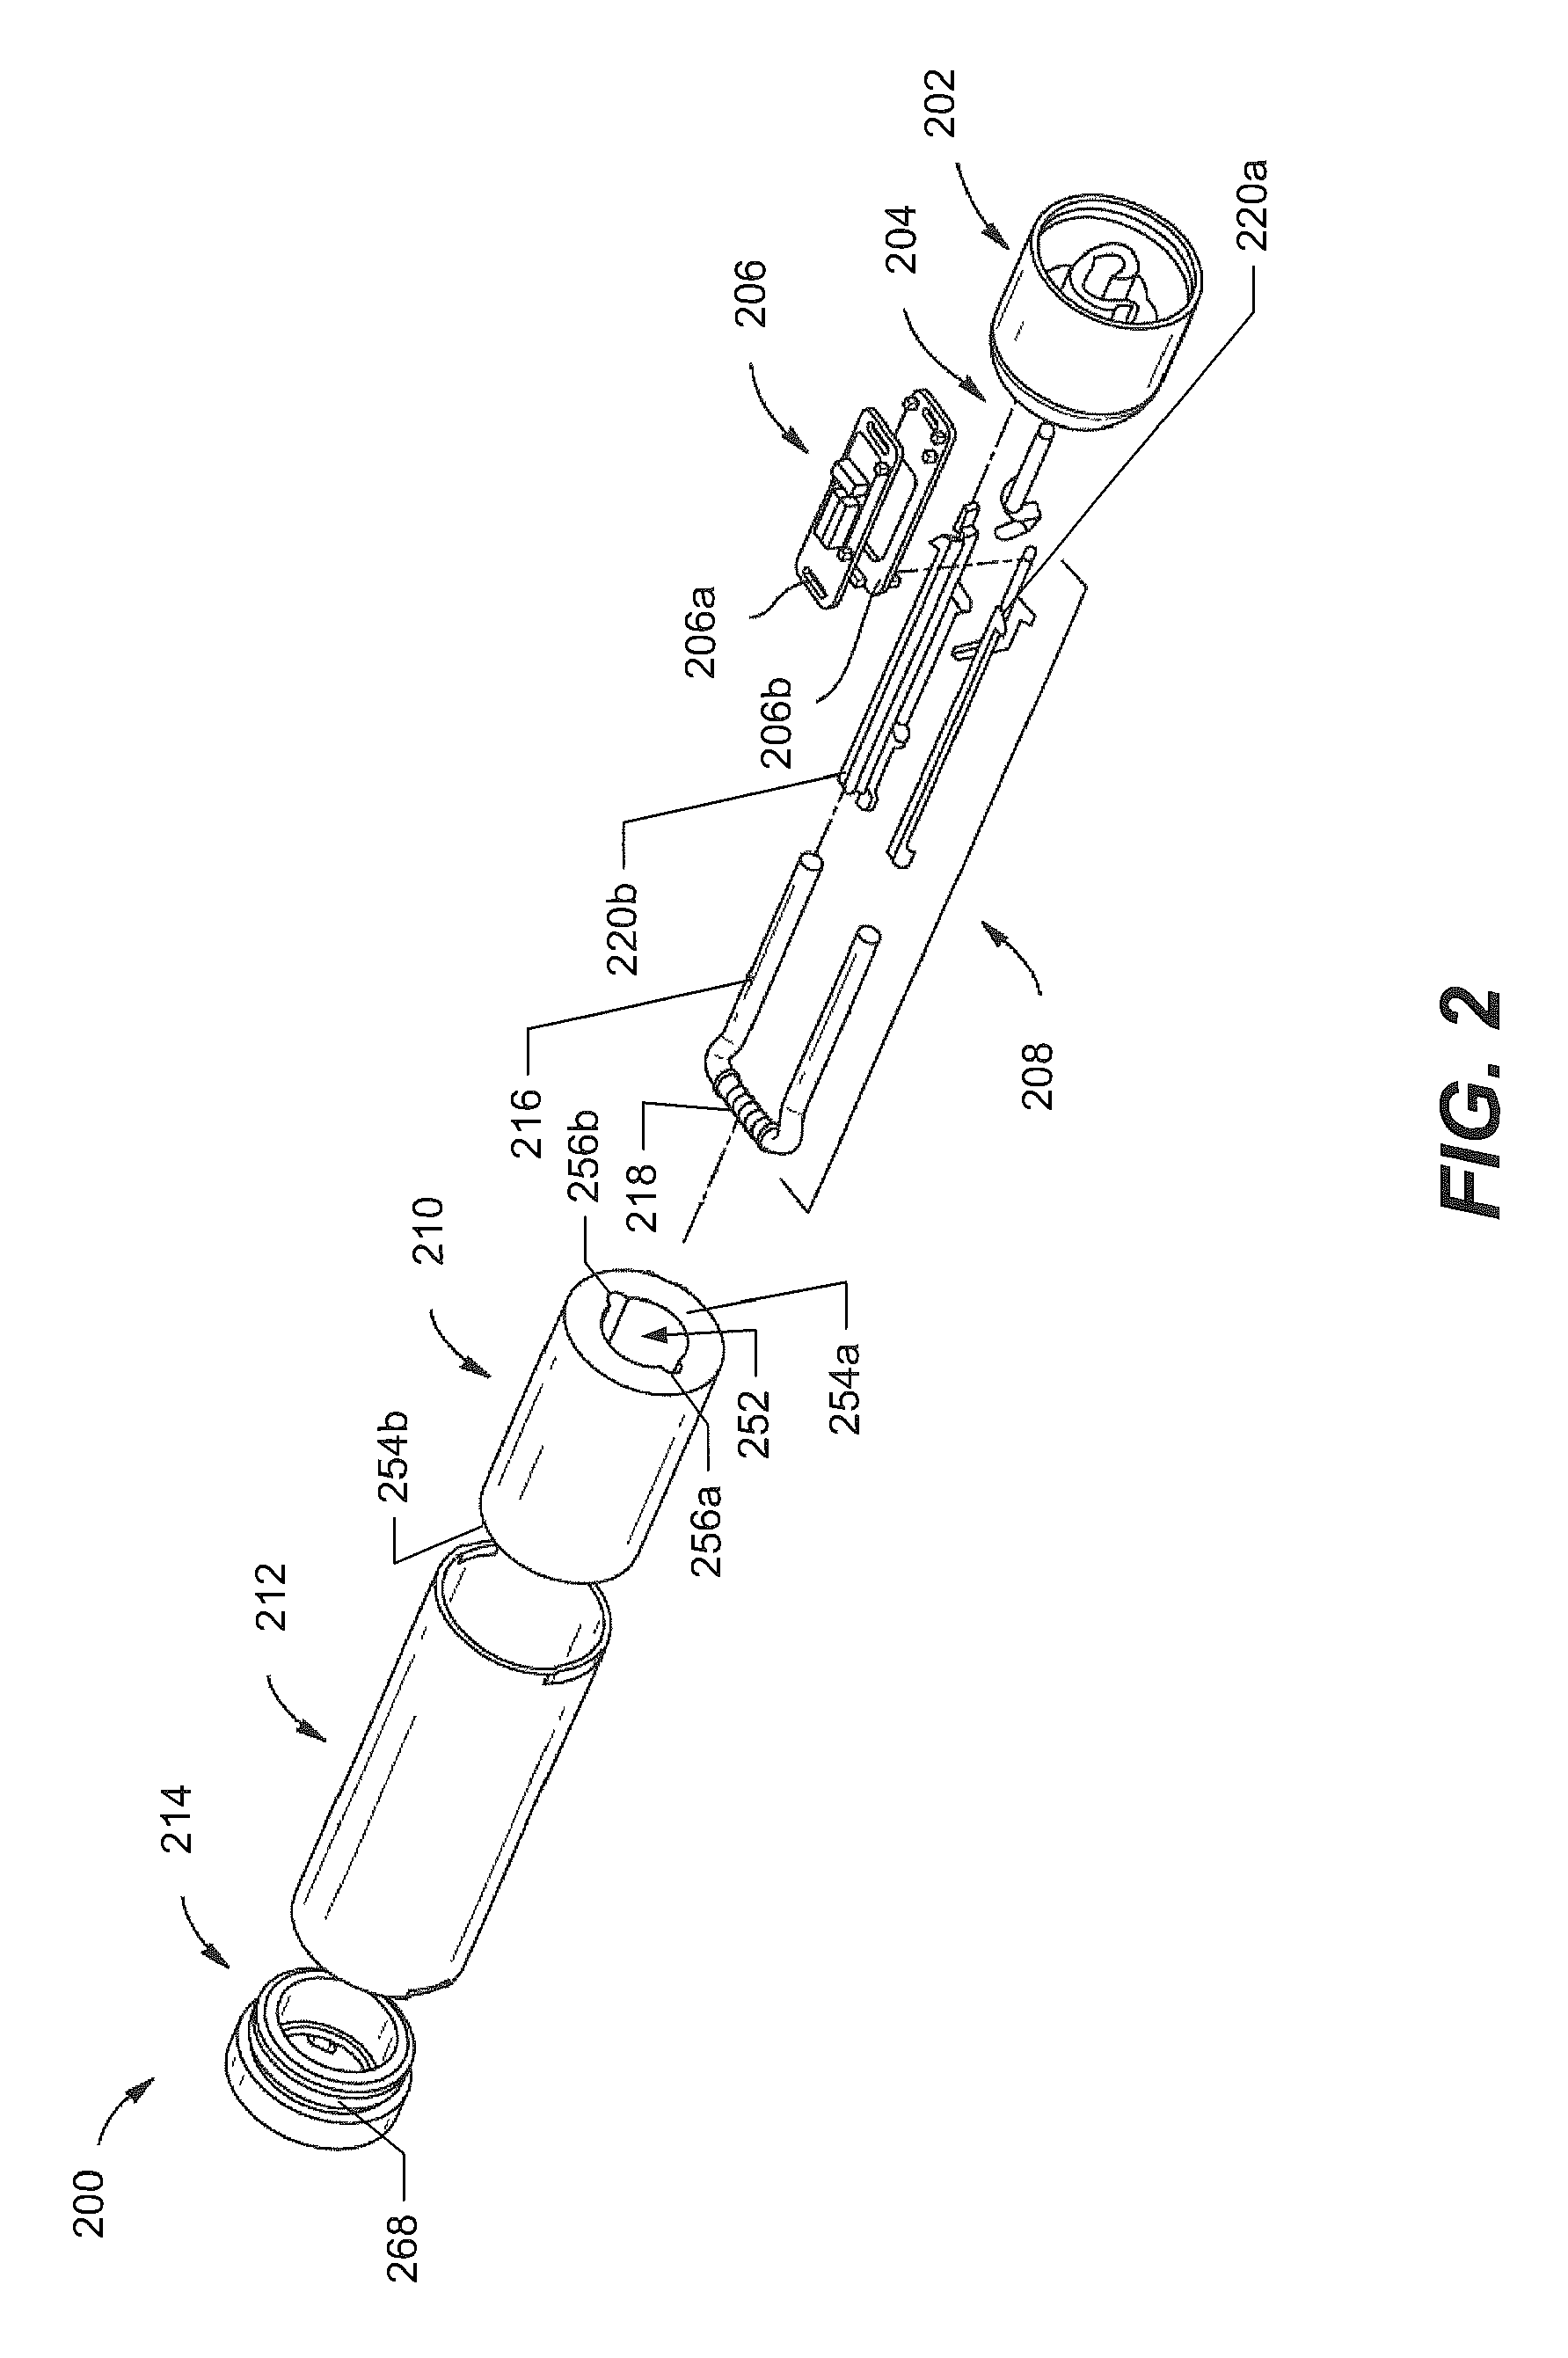 Atomizer for an aerosol delivery device formed from a continuously extending wire and related input, cartridge, and method